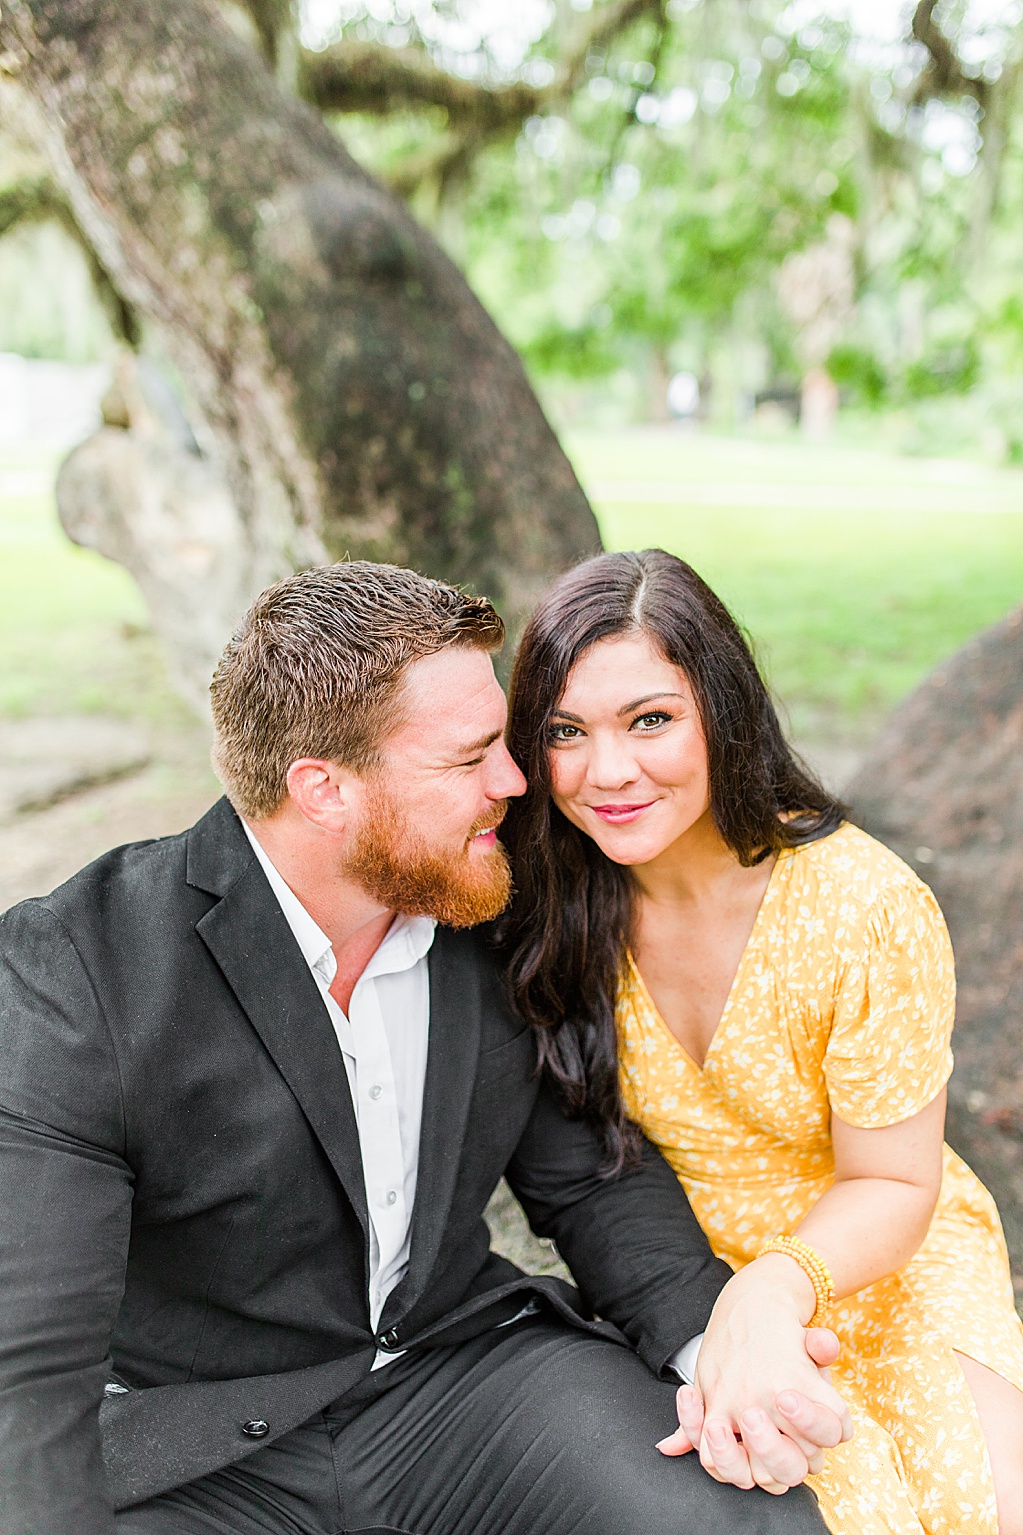 New Orleans City Park Engagment Photo Session by Wedding Photographer Allison Jeffers 0027